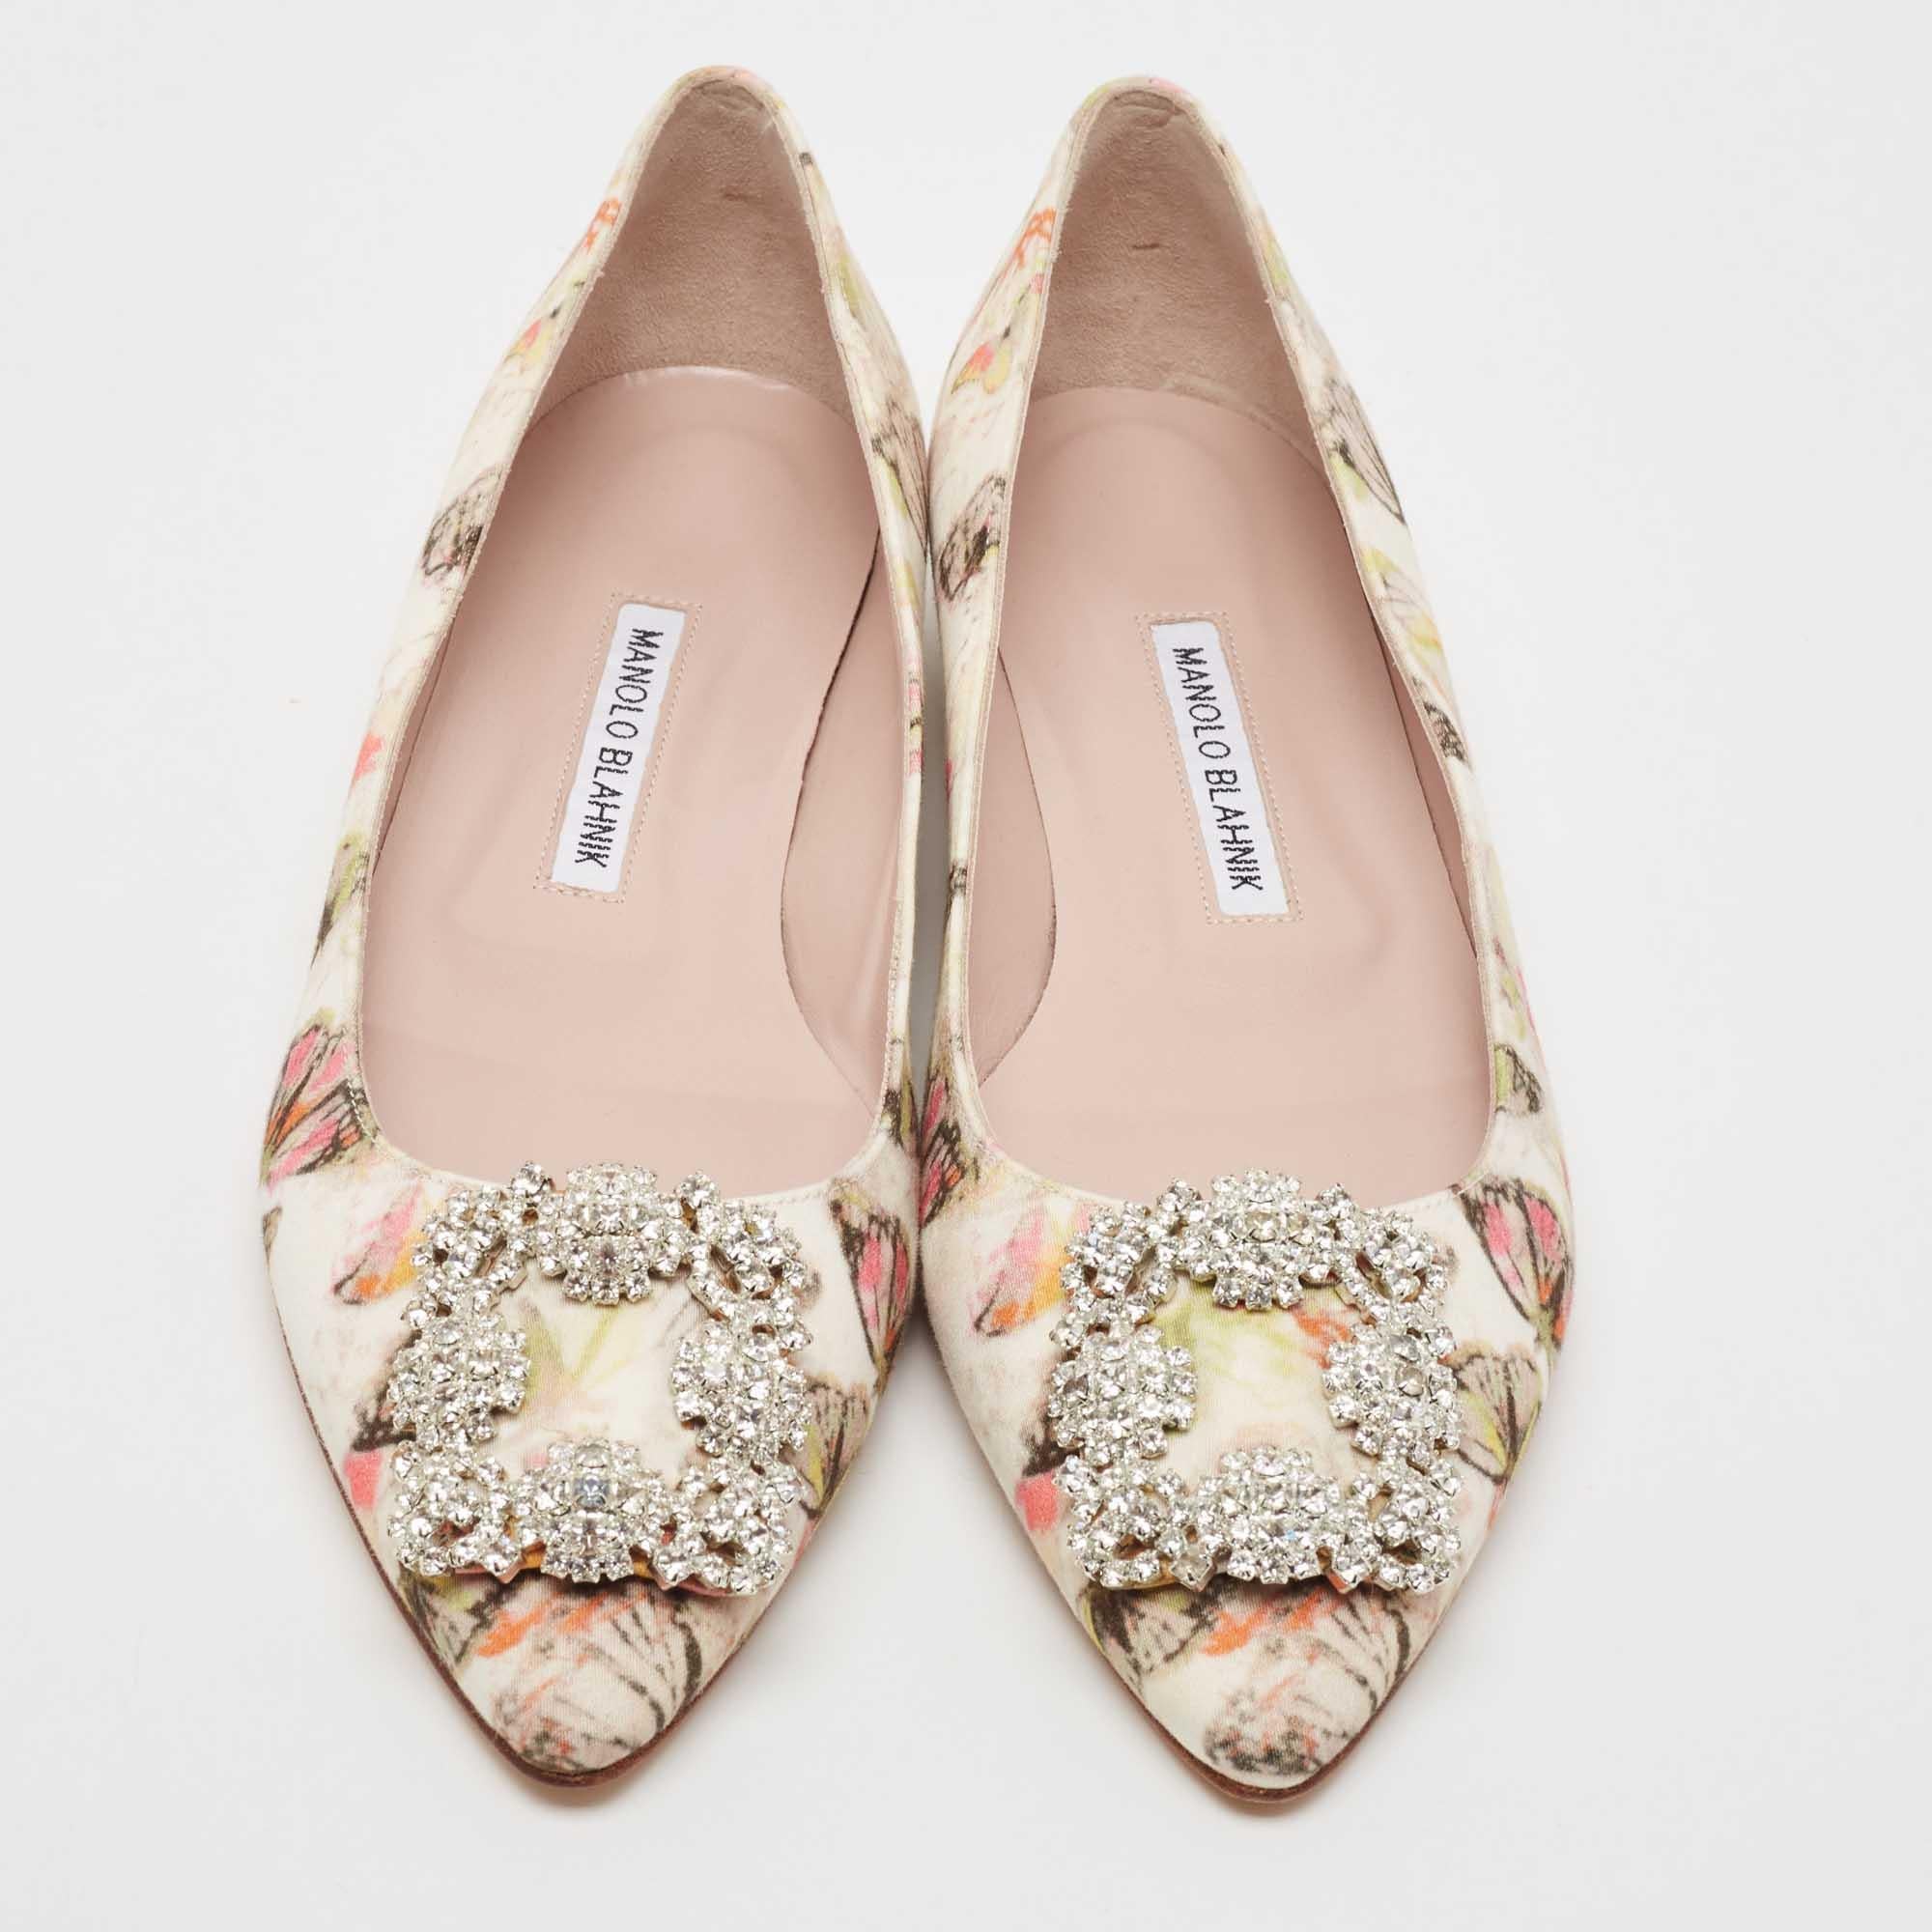 You know you are going to have a glamorous day the moment you put these ballet flats on. They are a Manolo Blahnik creation, meticulously crafted from multicolor satin and lined with leather on the insoles. The pair carries striking embellishments